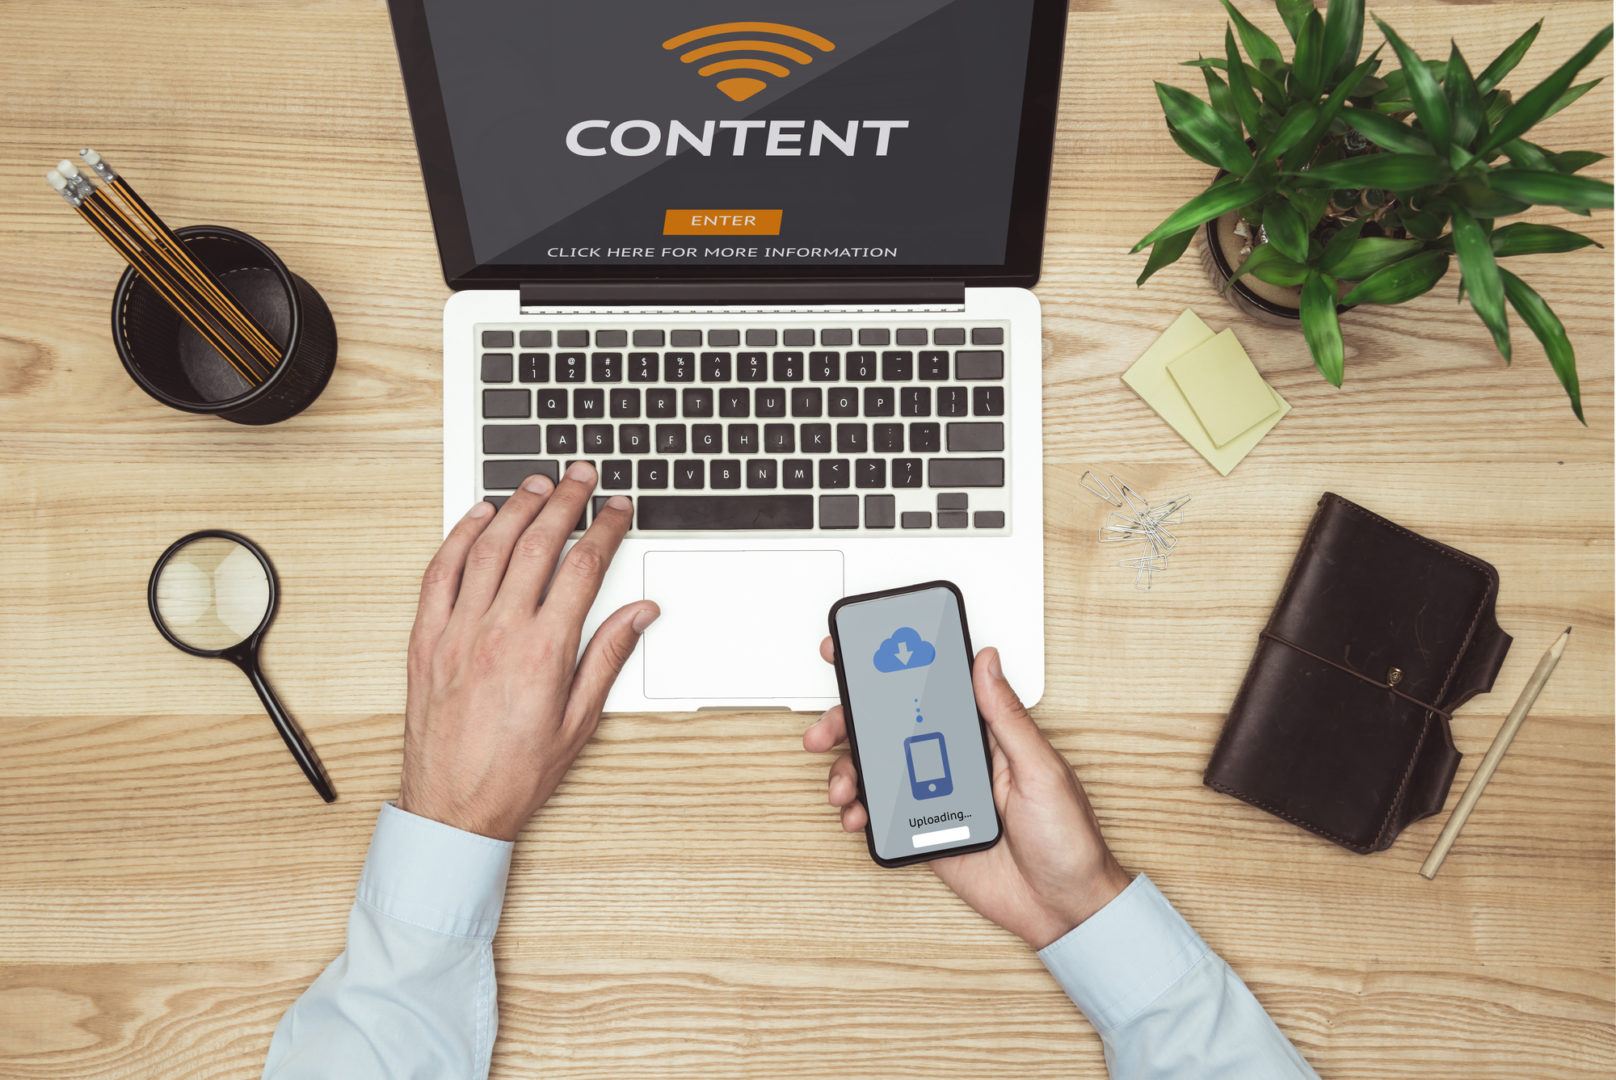 How to use third party content to drive traffic to your